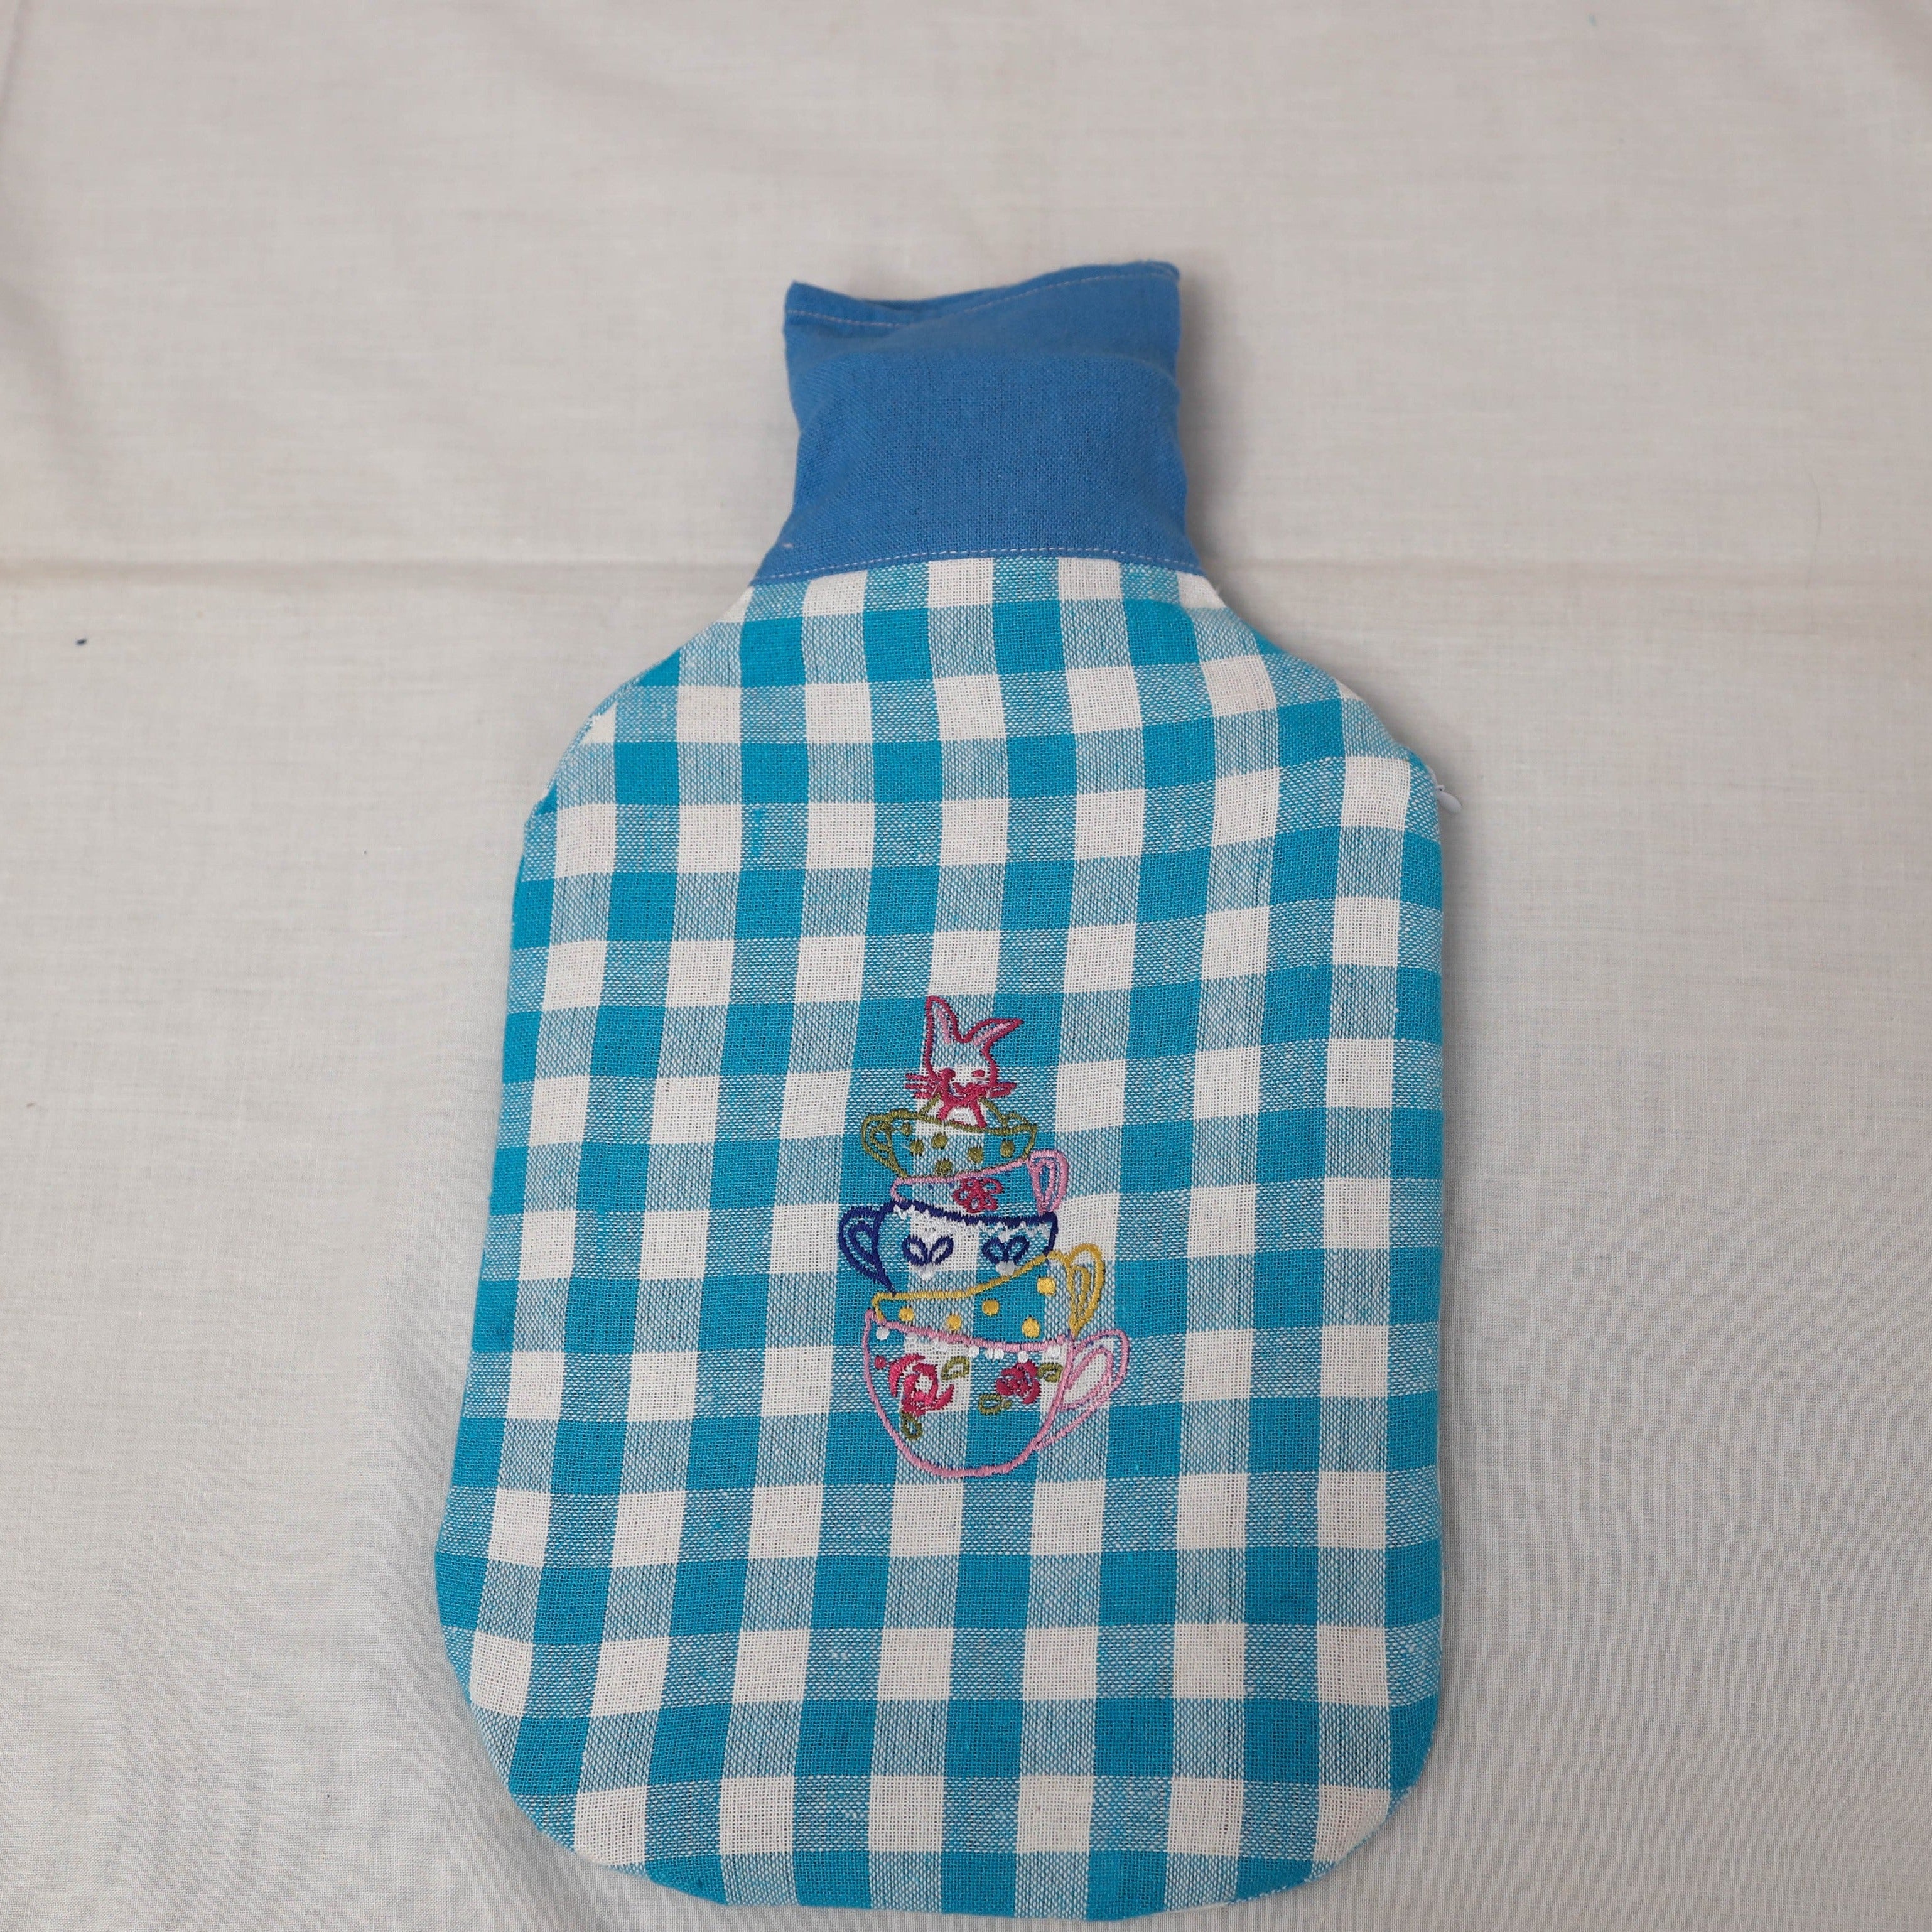 Hot-water bag cover with embroidery (Pre-order)